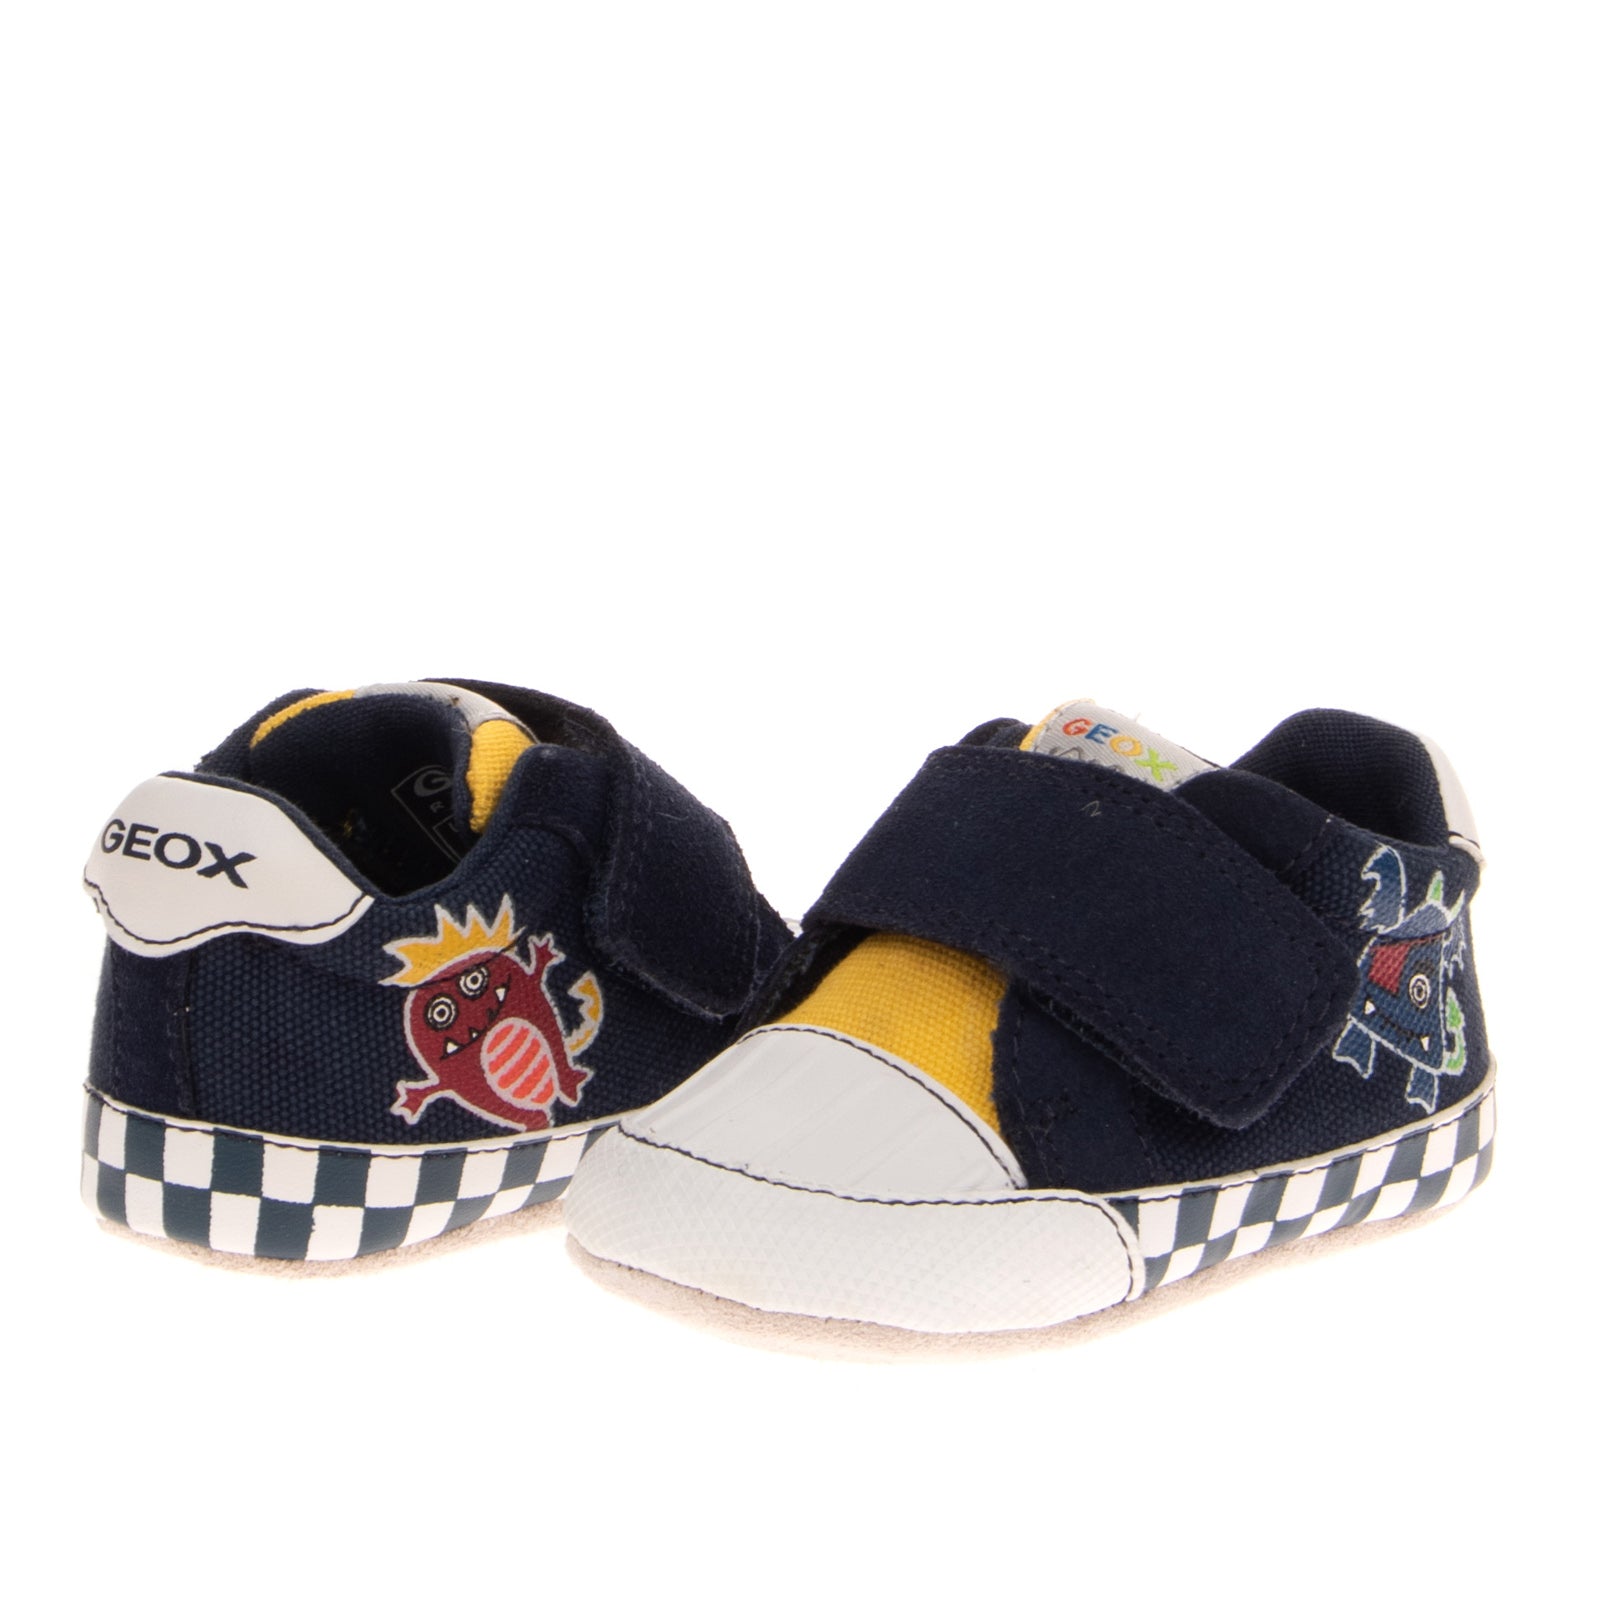 GEOX RESPIRA Baby Canvas & Leather Sneakers EU 20 UK 3.5 US 4.5 Coated Monster gallery main photo